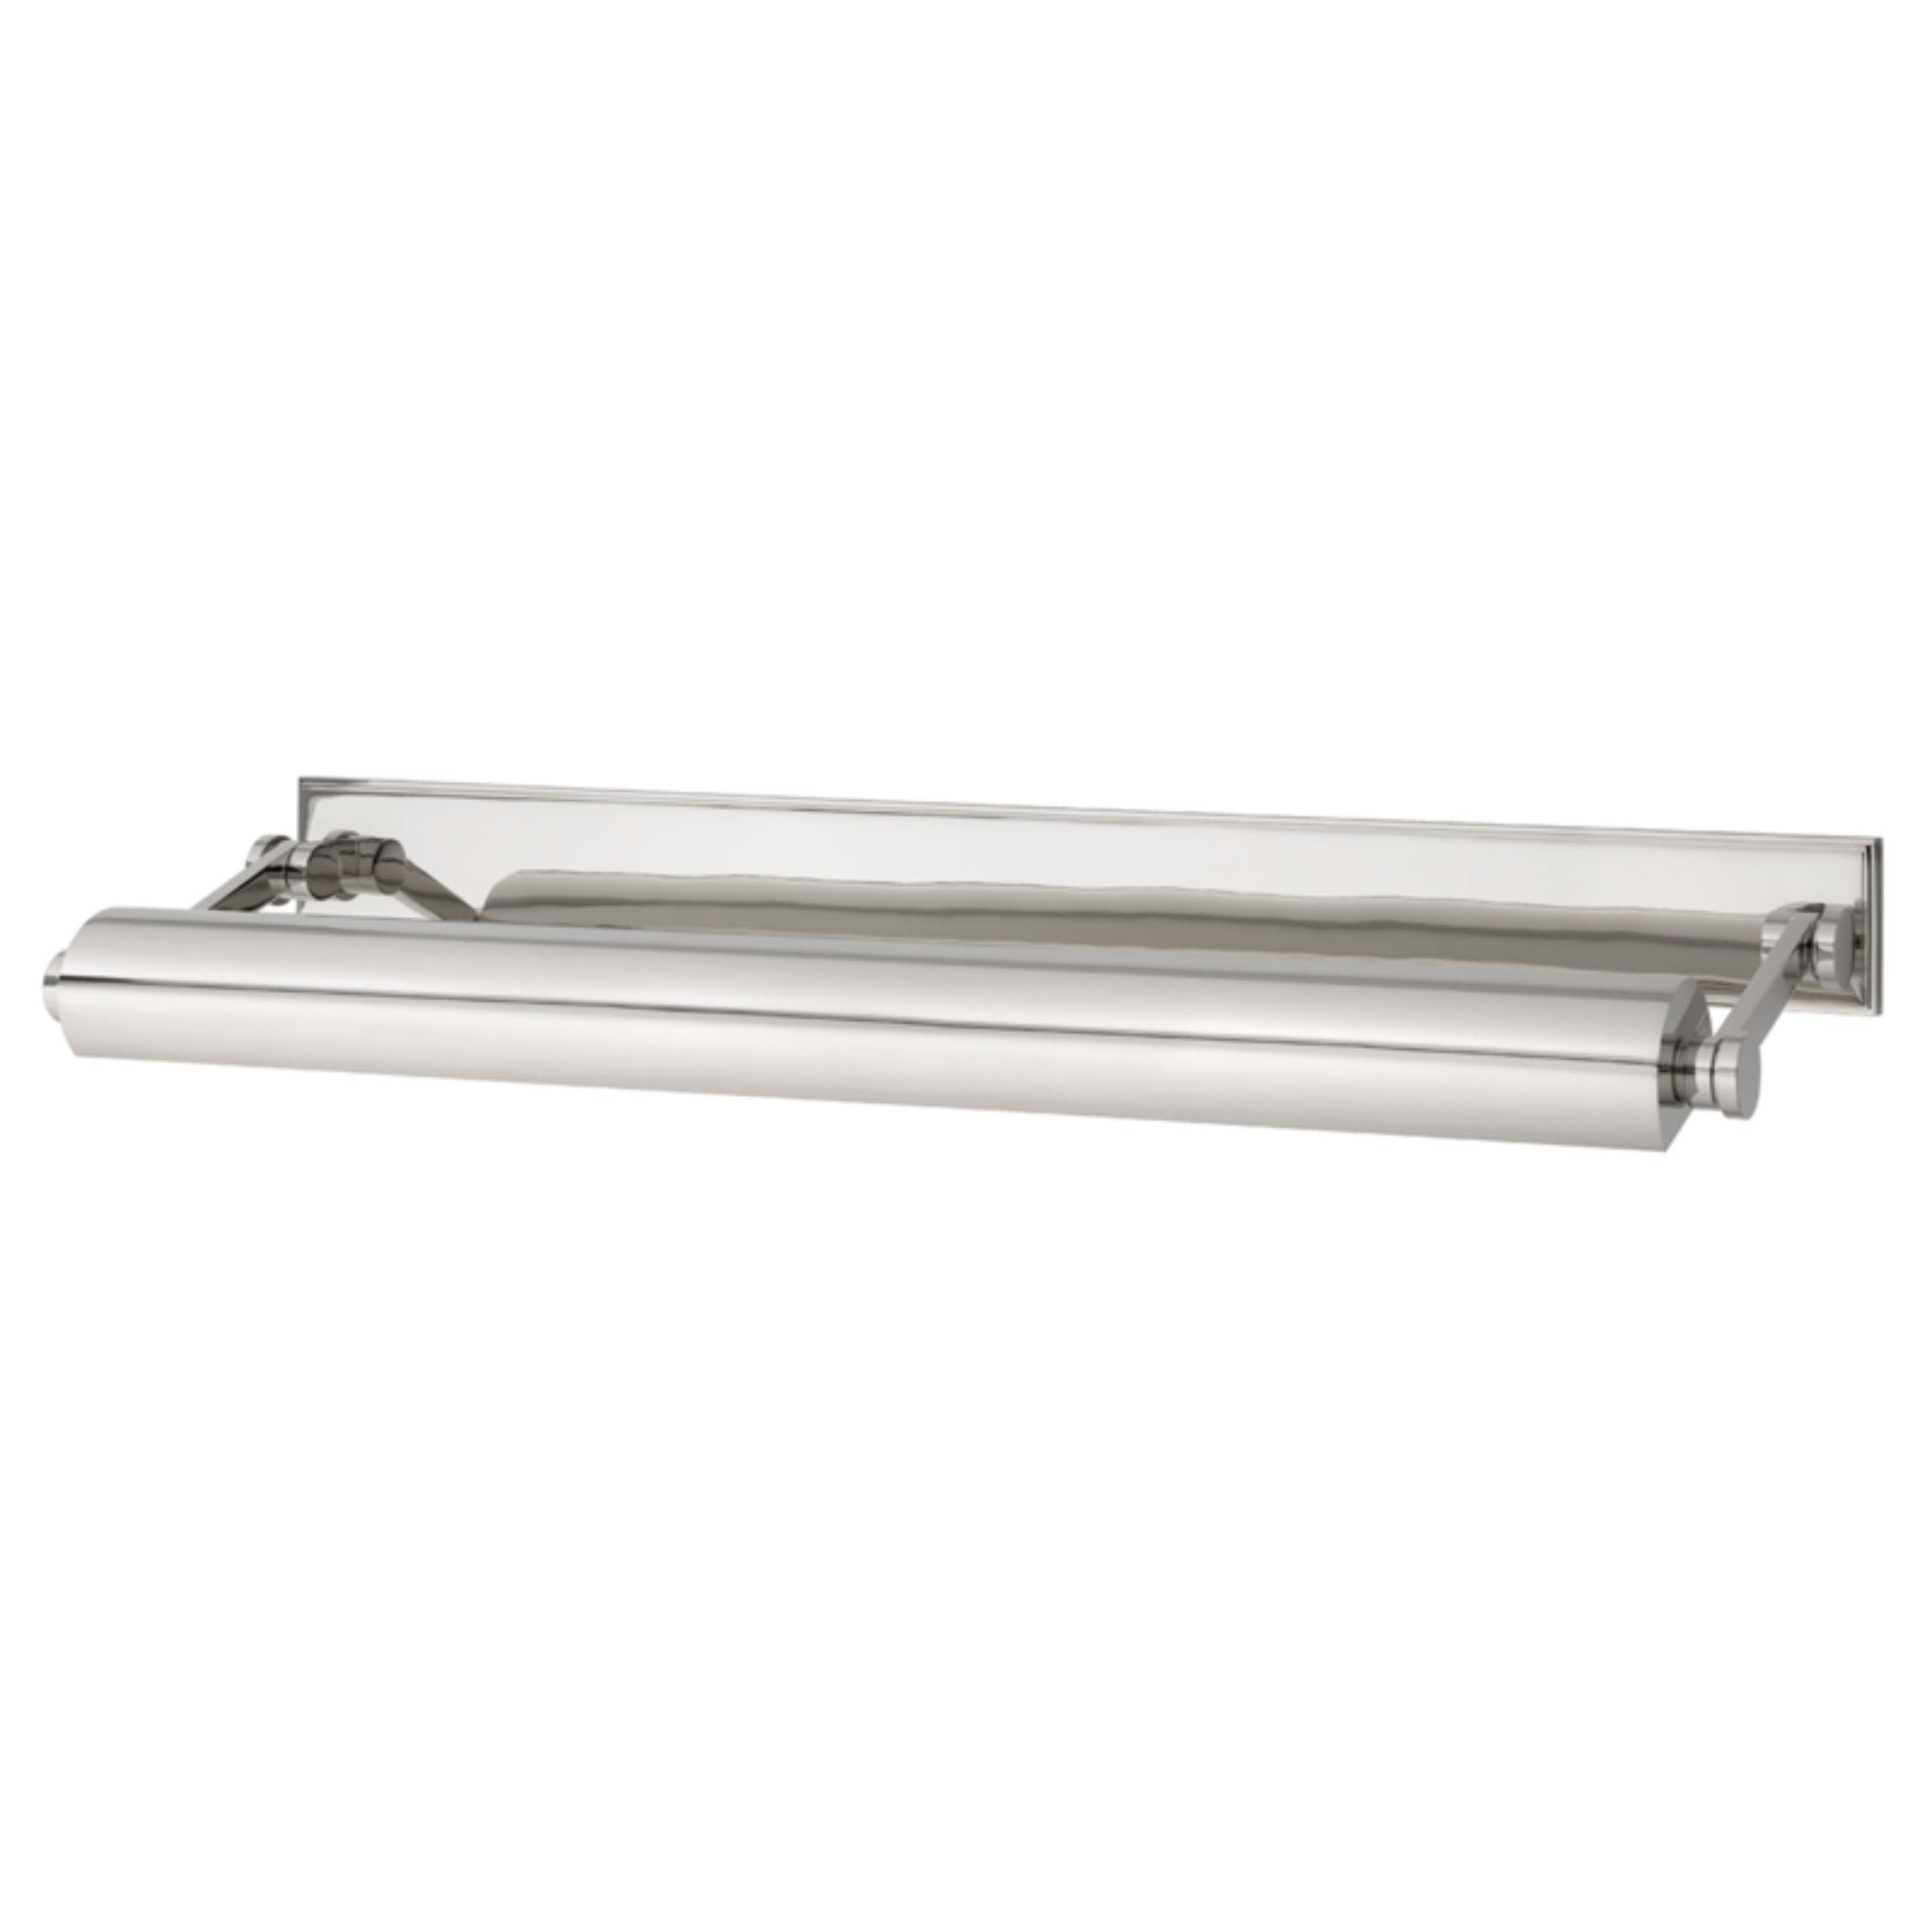 Merrick 4 Light Picture Light in Polished Nickel